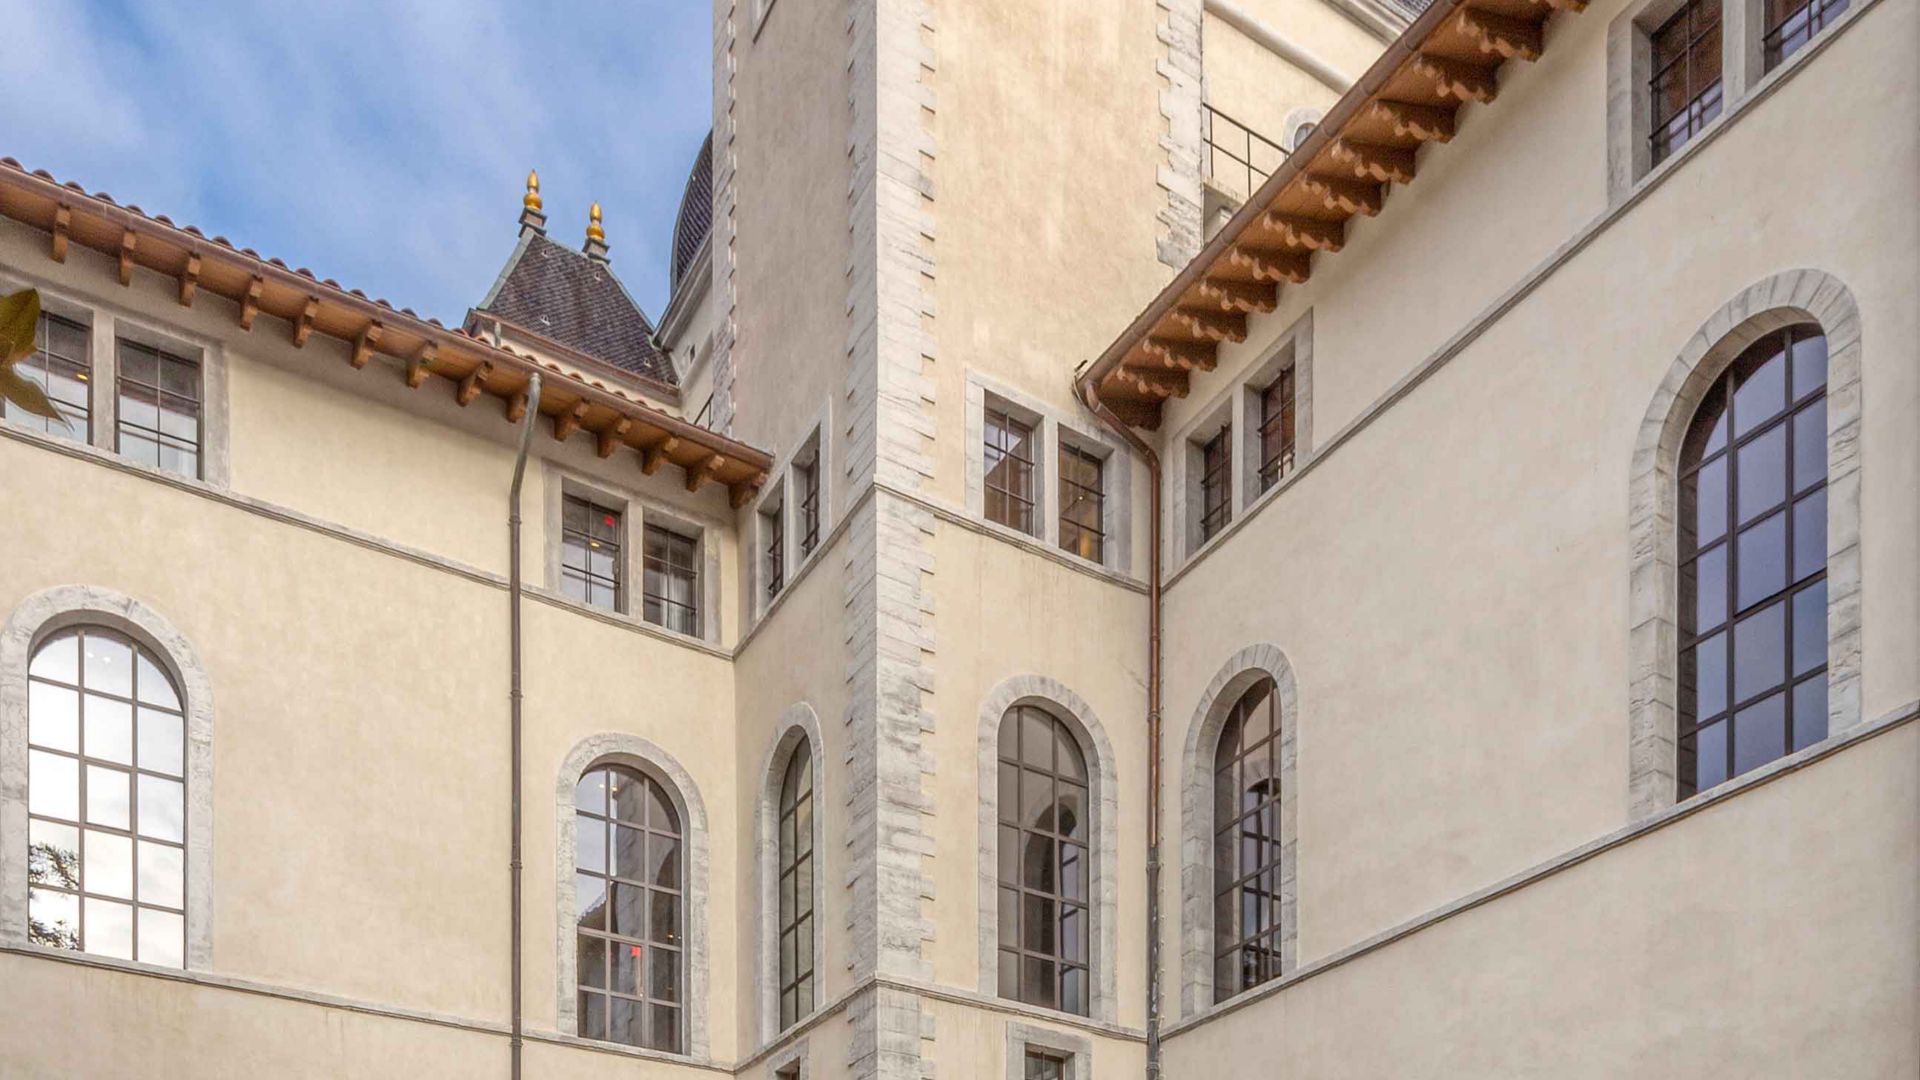 Grand Hotel Dieu in France with facade finish plaster render